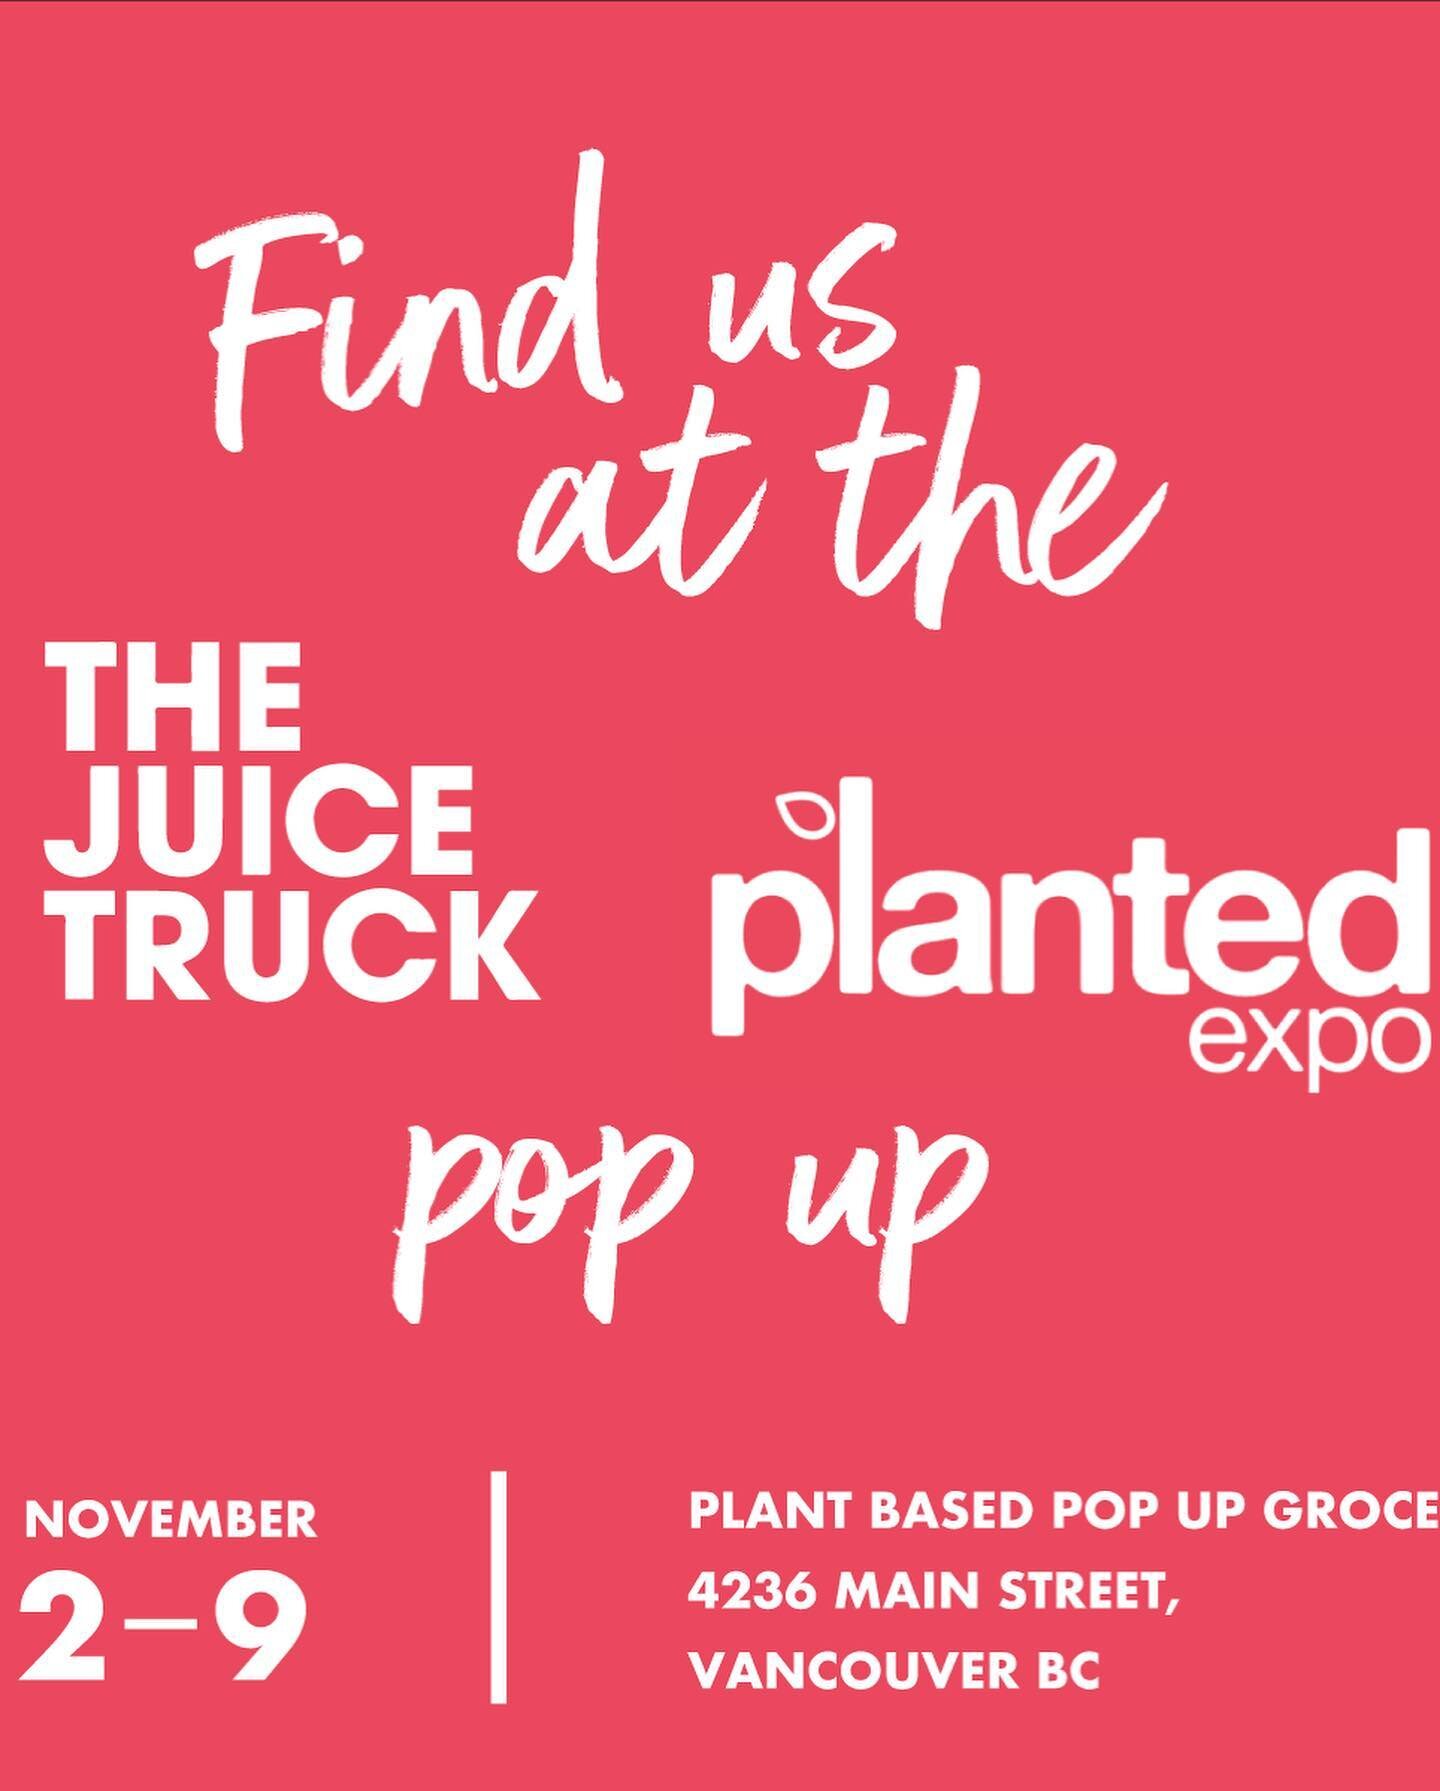 If you&rsquo;re looking for a one stop shop for local and plant-based goodness you&rsquo;re in for a treat! @juicetruck @plantedexpo are hosting so many awesome brands for their pop up this week only! 

Nov. 2 - 9th at their Main Street location 

Co